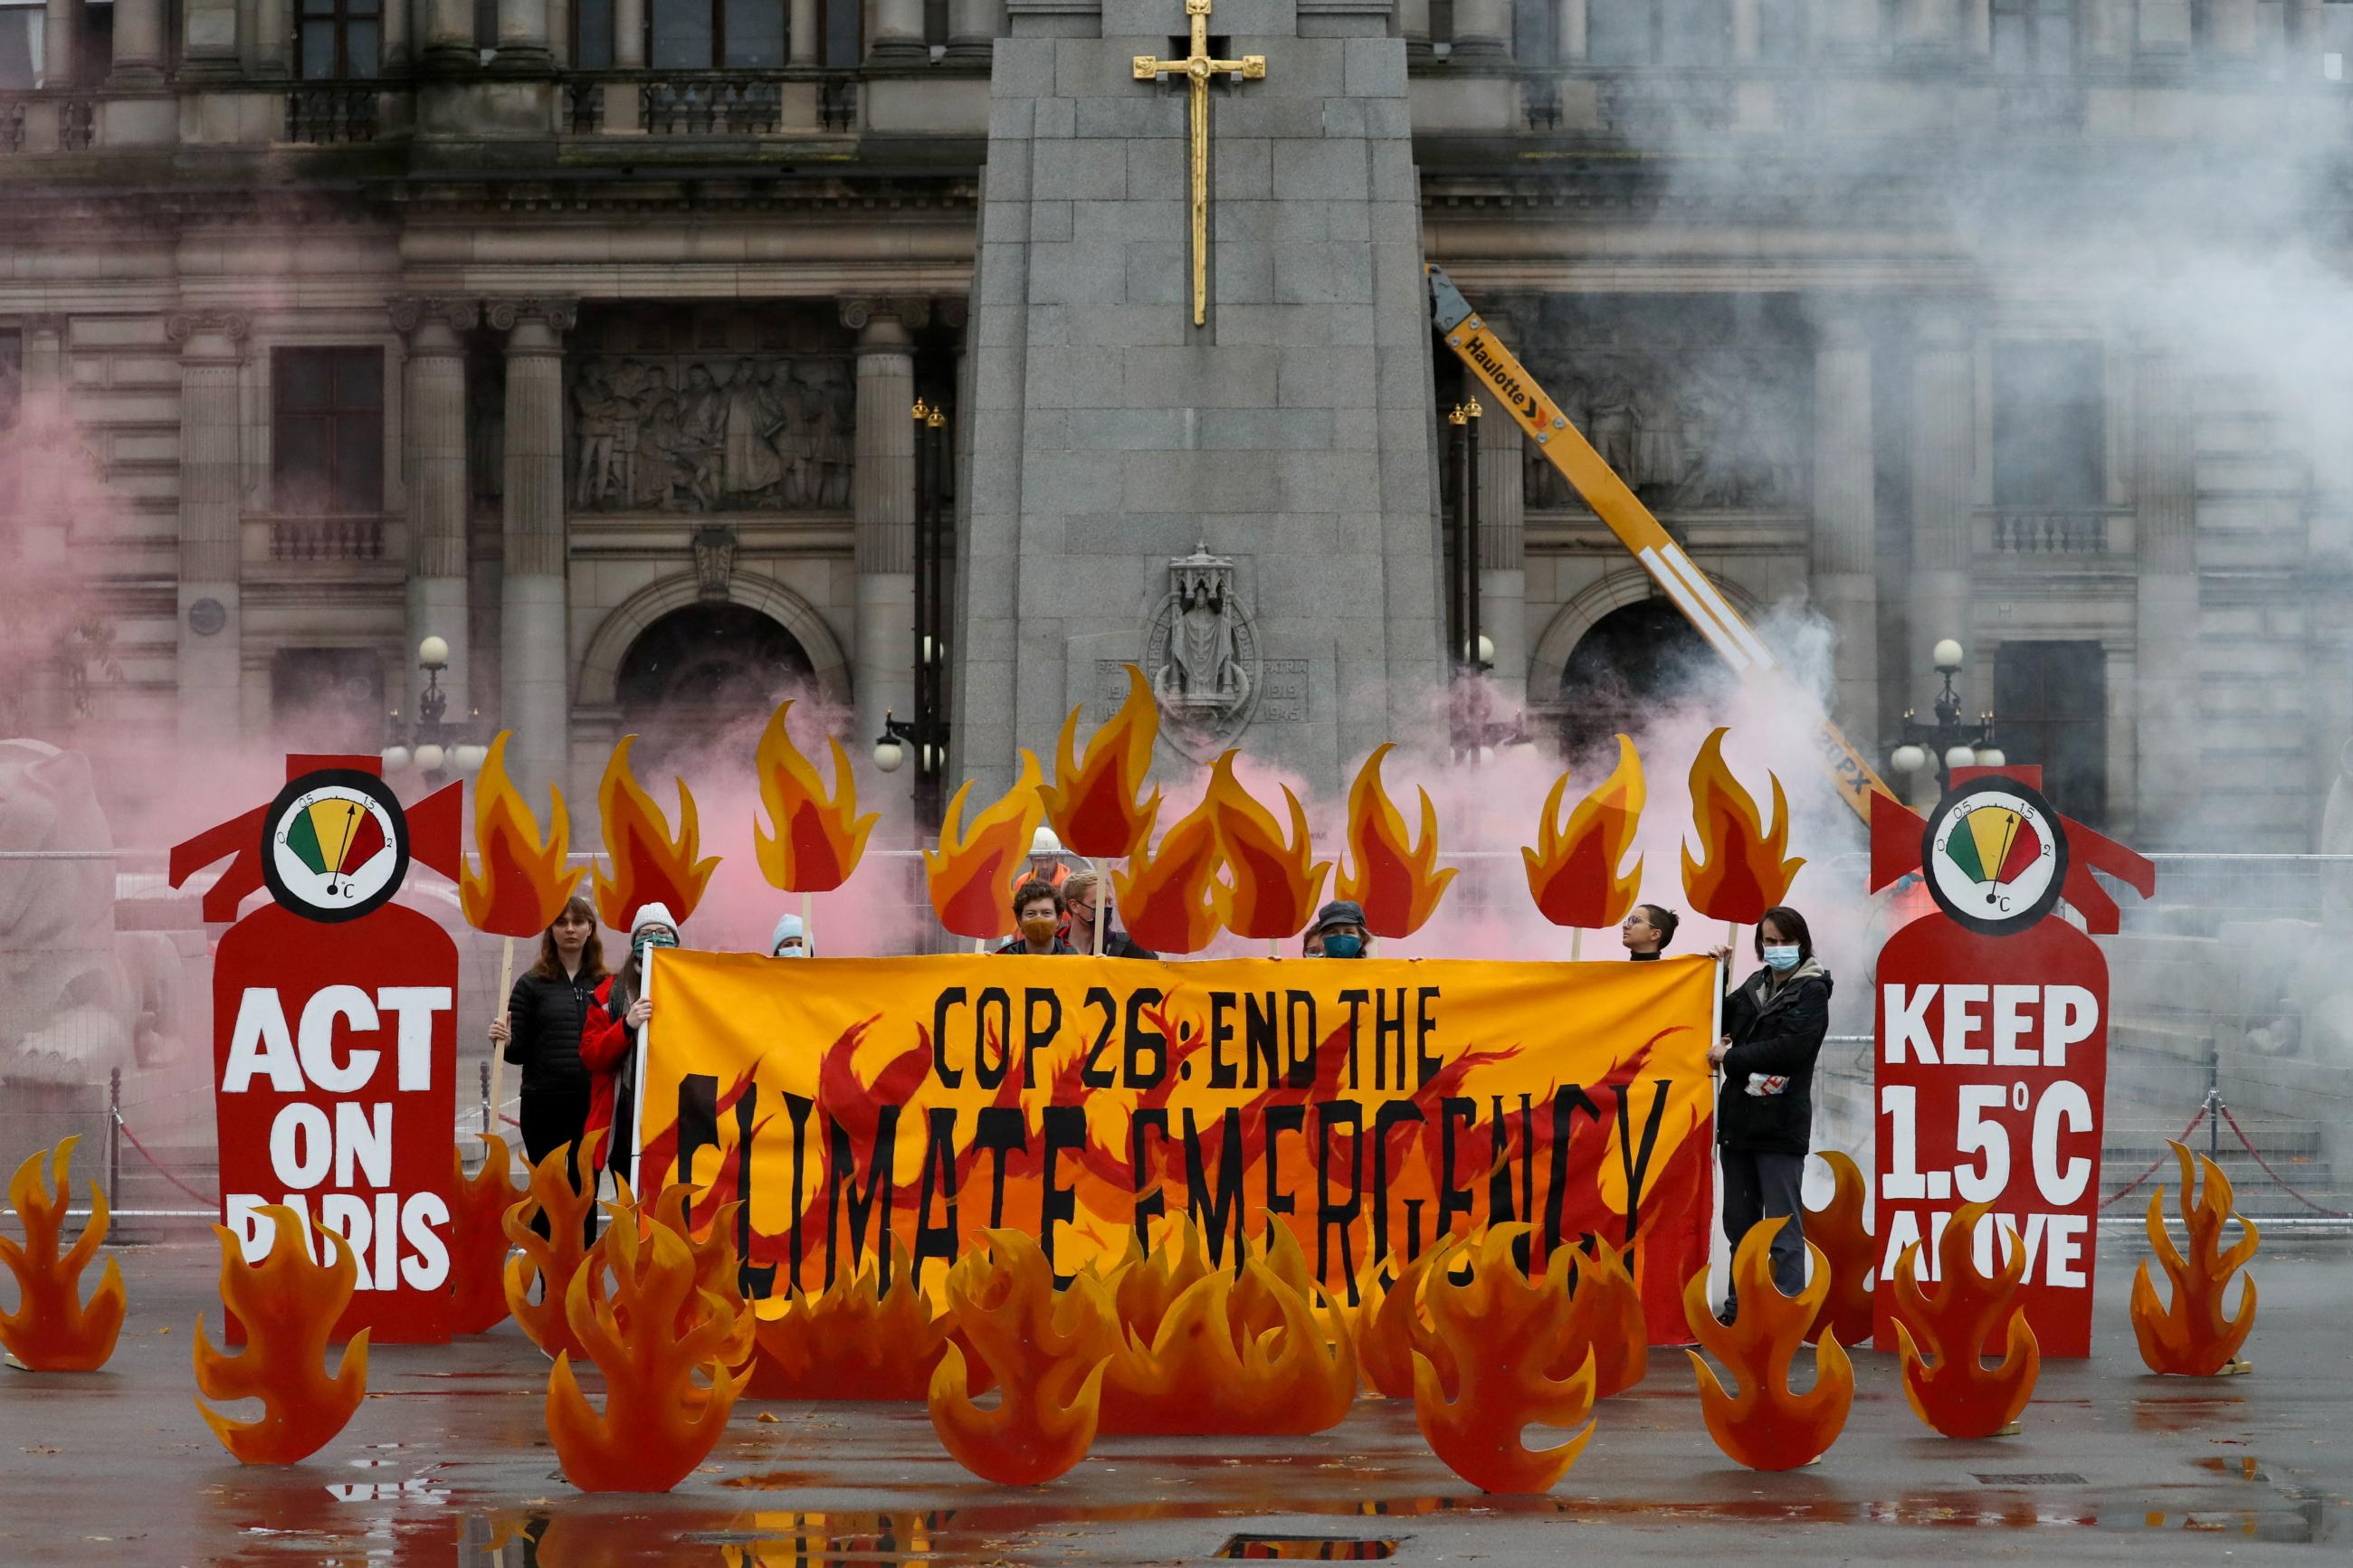 Activists symbolically set George Square on fire with an art installation of faux flames and smoke ahead of the UN Climate Change Conference (COP26), in Glasgow, Scotland, Britain October 28, 2021.